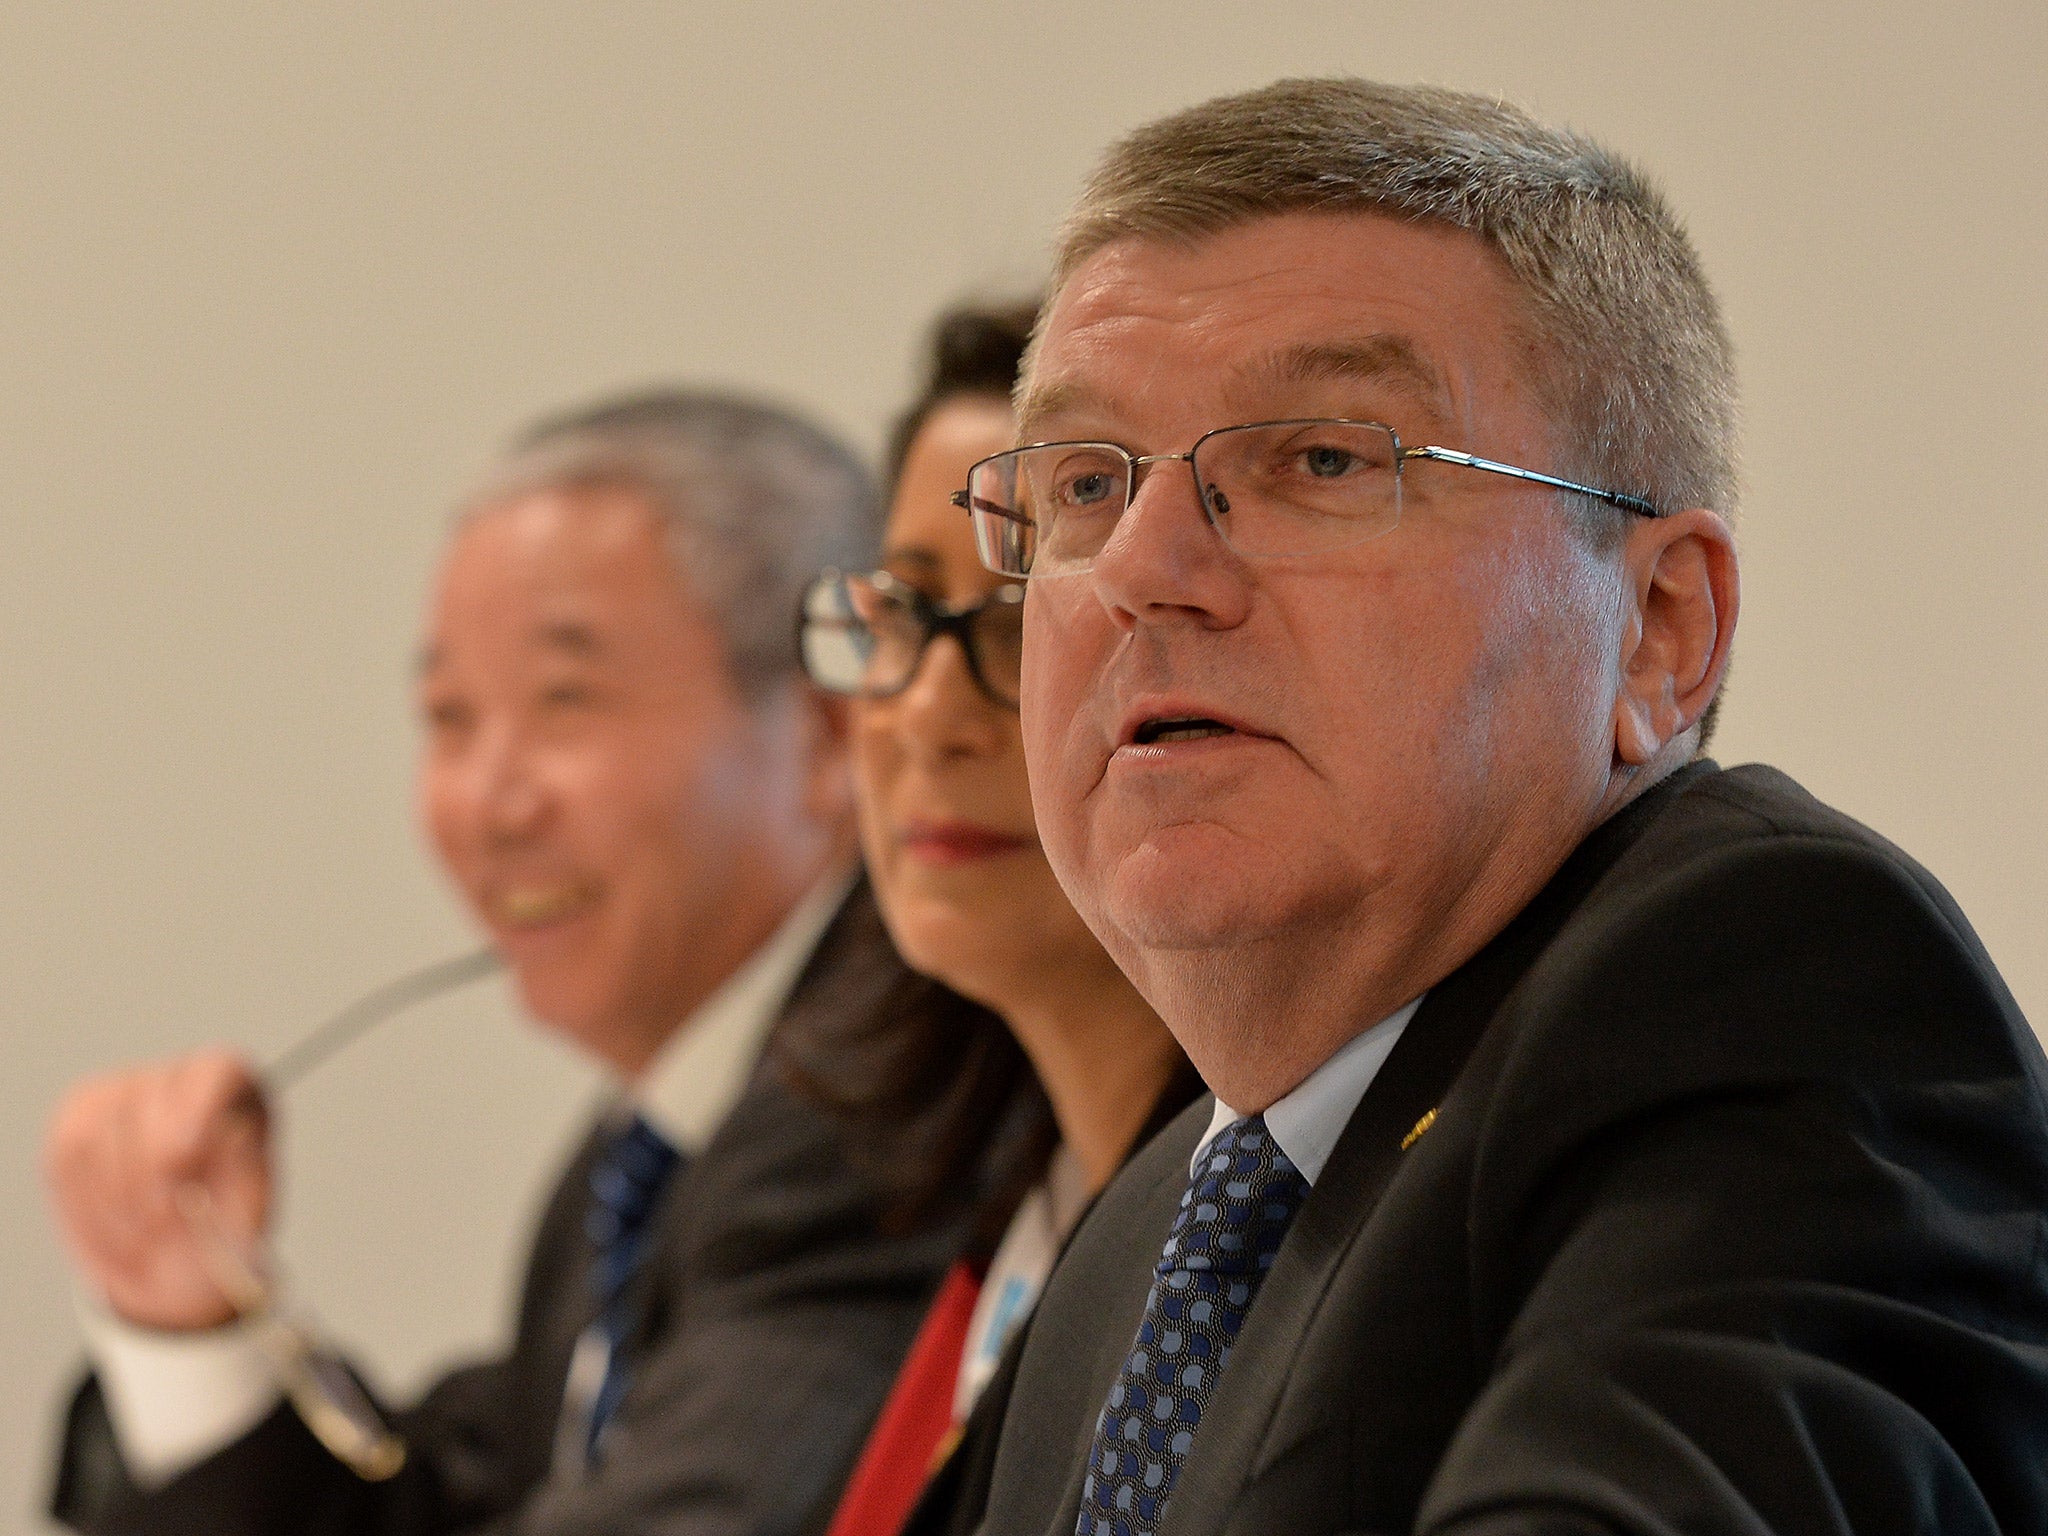 IOC president Thomas Bach has hinted at entire federations being banned for the Rio Olympics